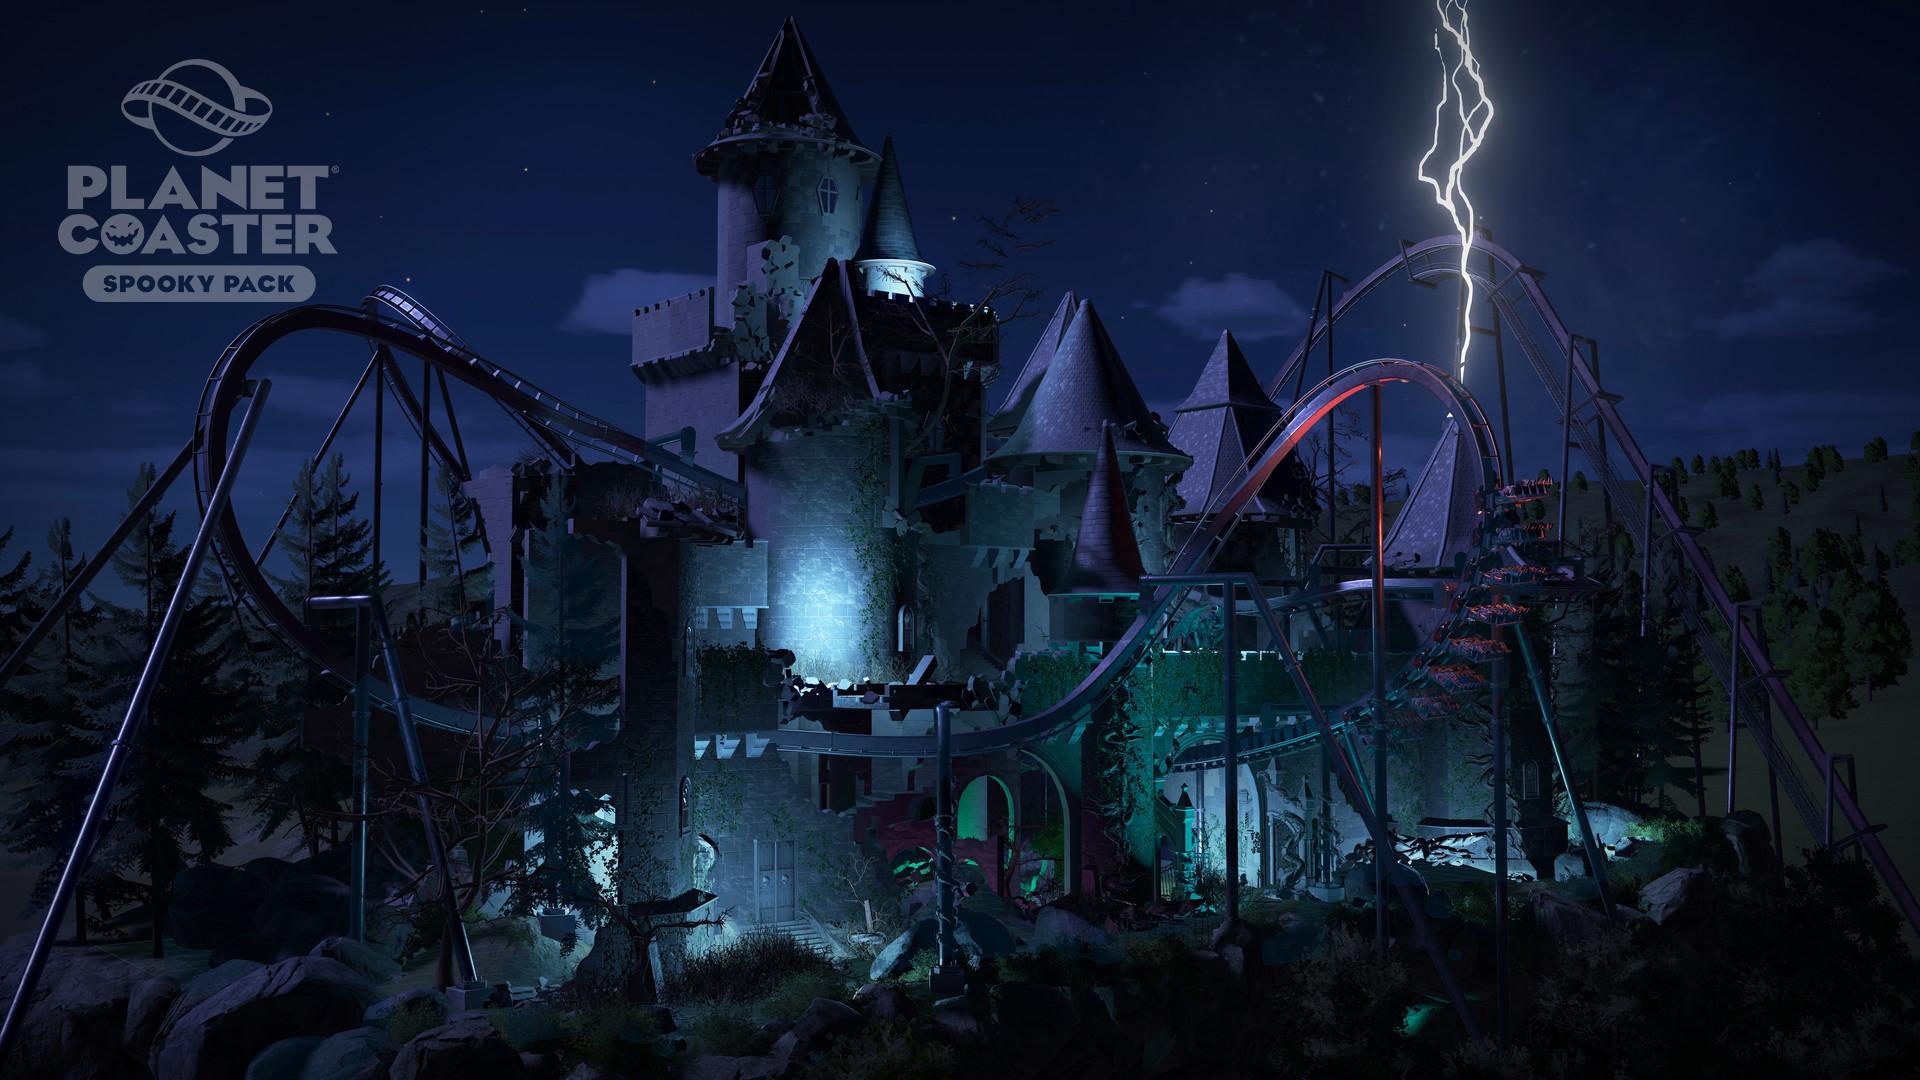 Planet Coaster: Spooky Pack (2017) promotional art